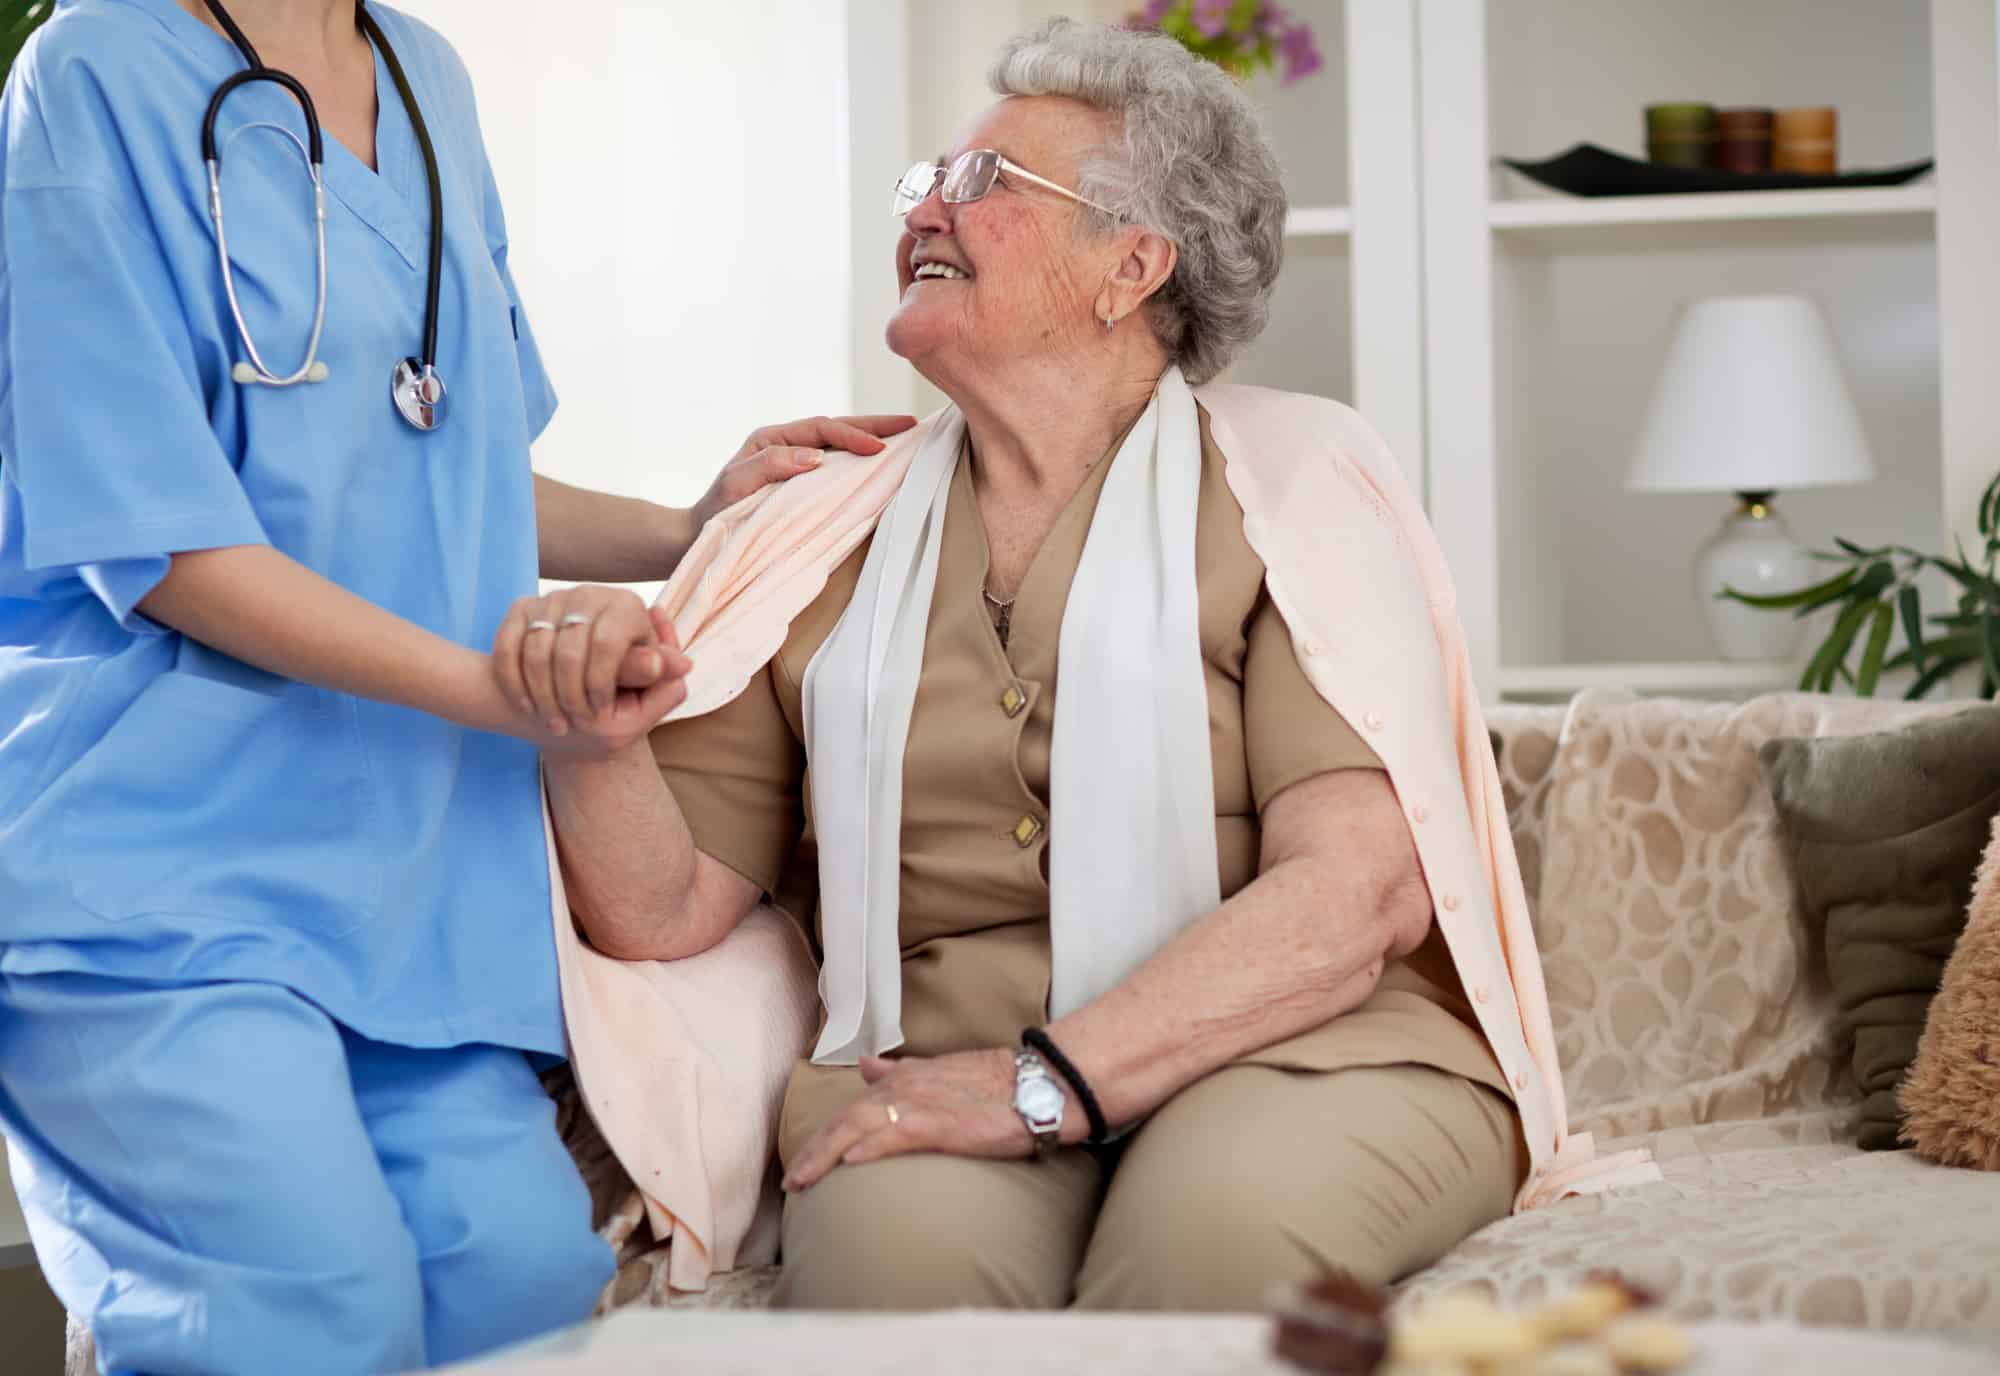 7 Awesome Benefits of In Home Care for Senior Citizens